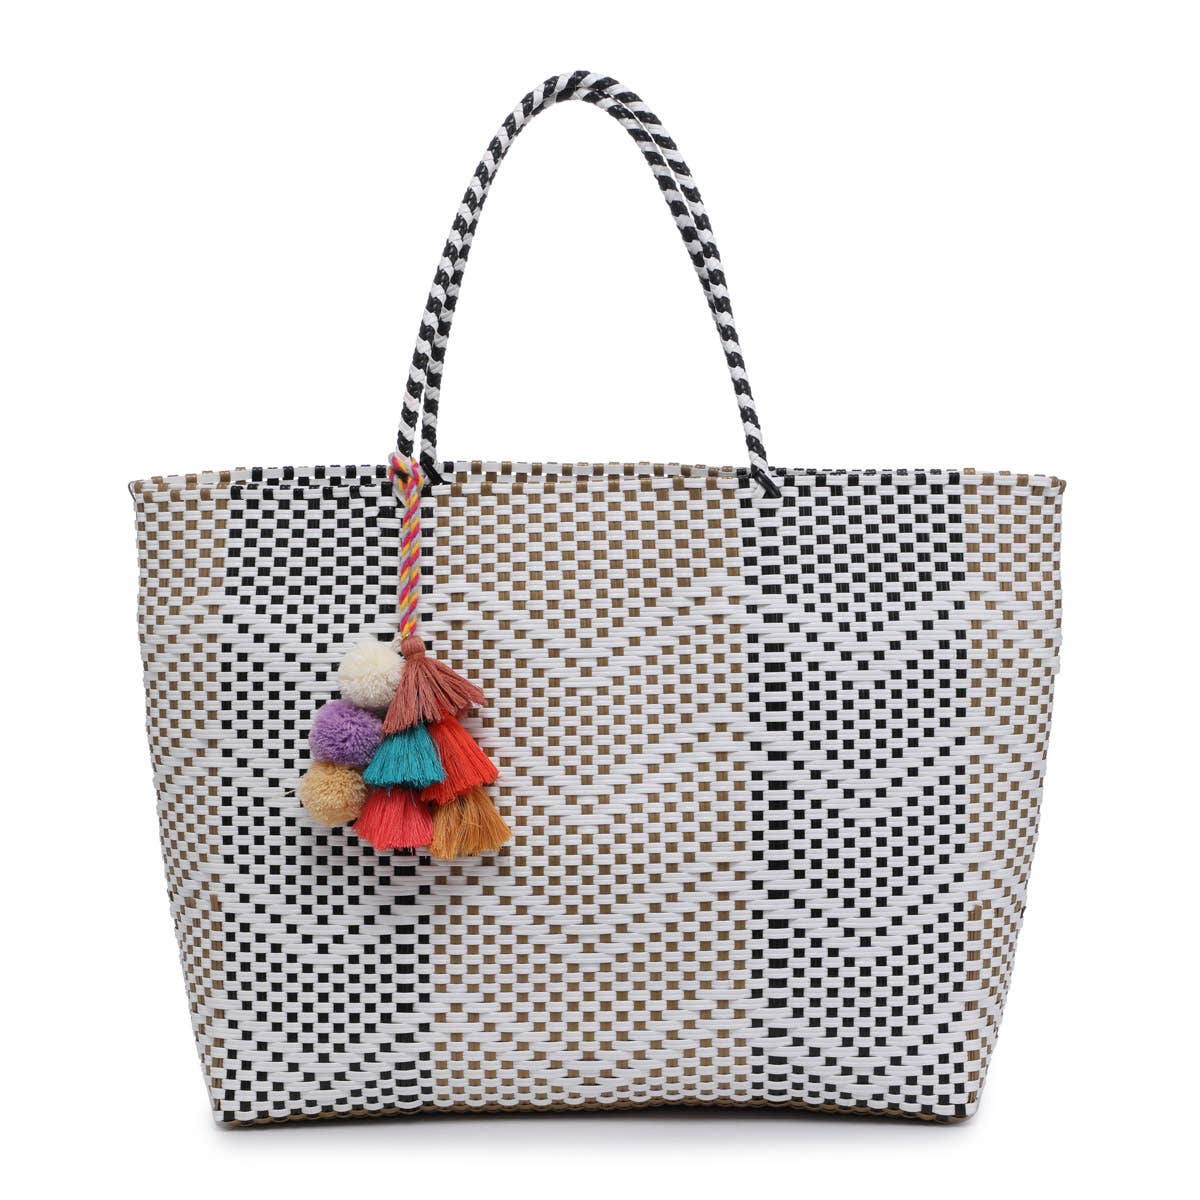 Shelby Large Handwoven Tote w/ Pom-Poms- Beige